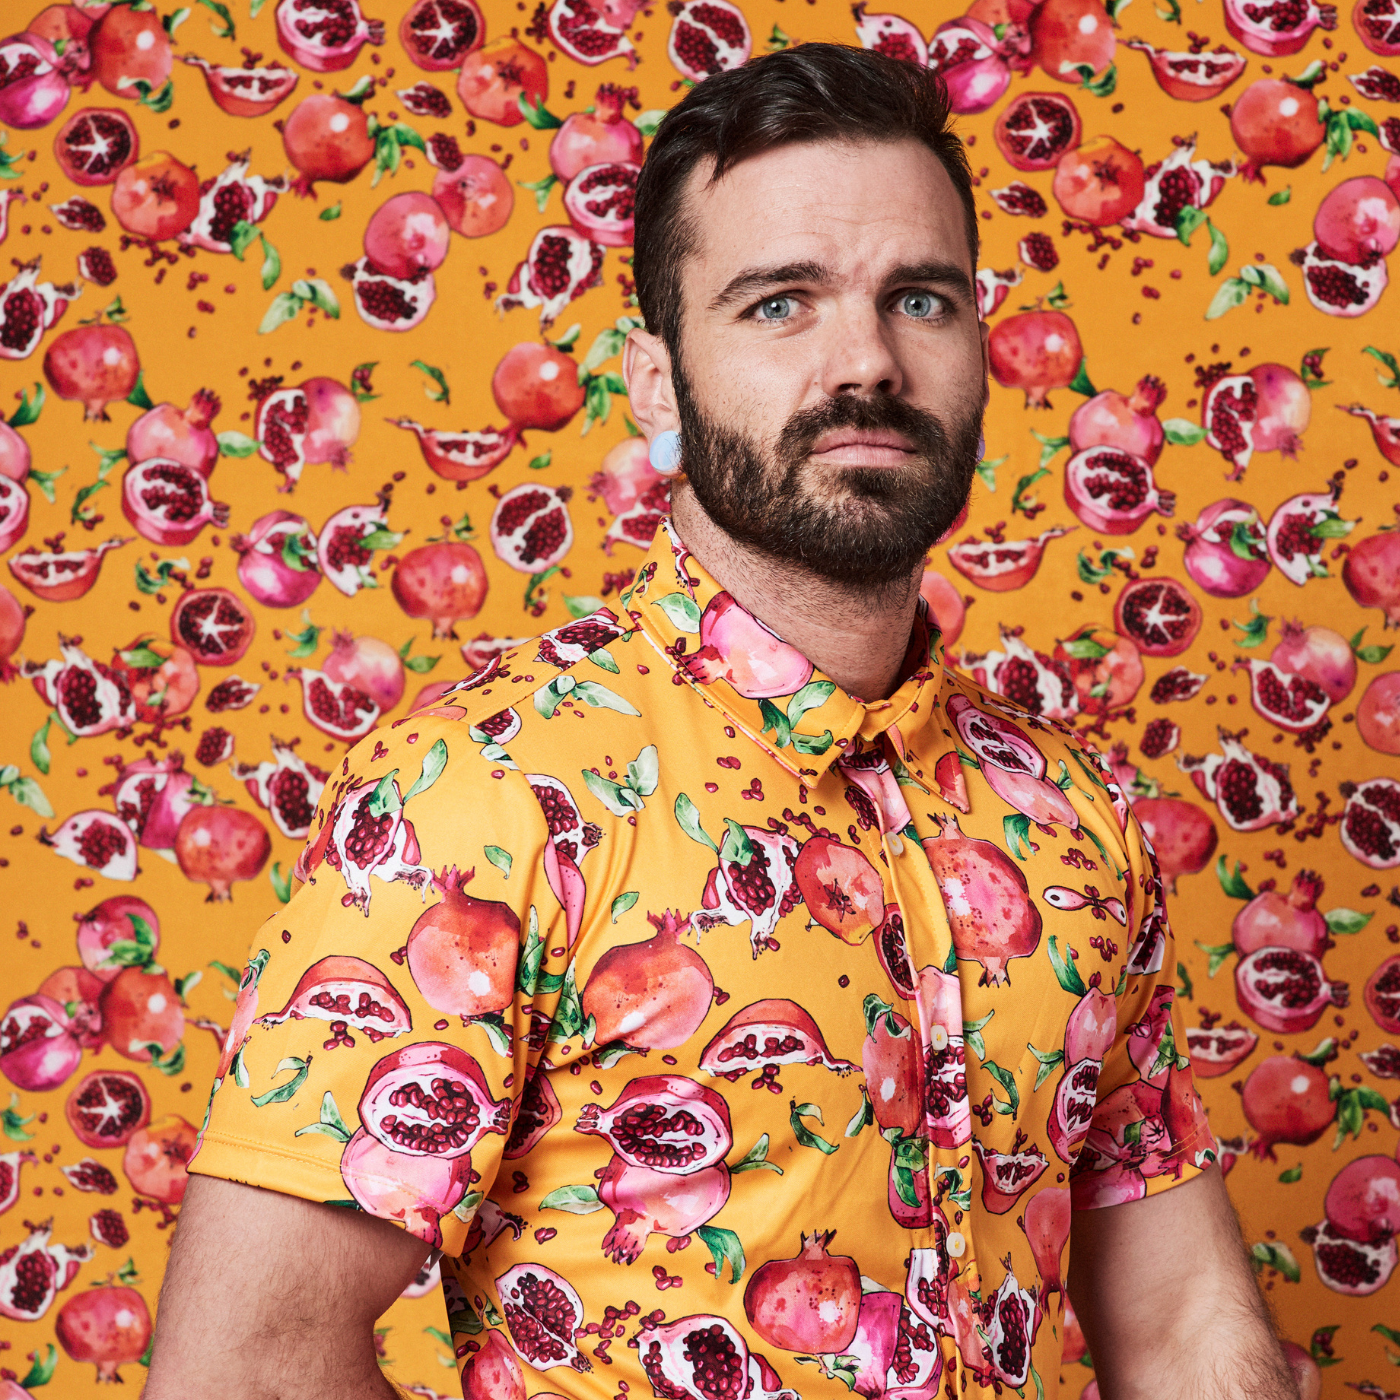 Anthony stands in front of a wall with his right hand behind his back and wears a shirt with an orange background and a design with pink and red pomegranates with green leaves. The wallpaper on the wall behind him is the same design as his shirt.